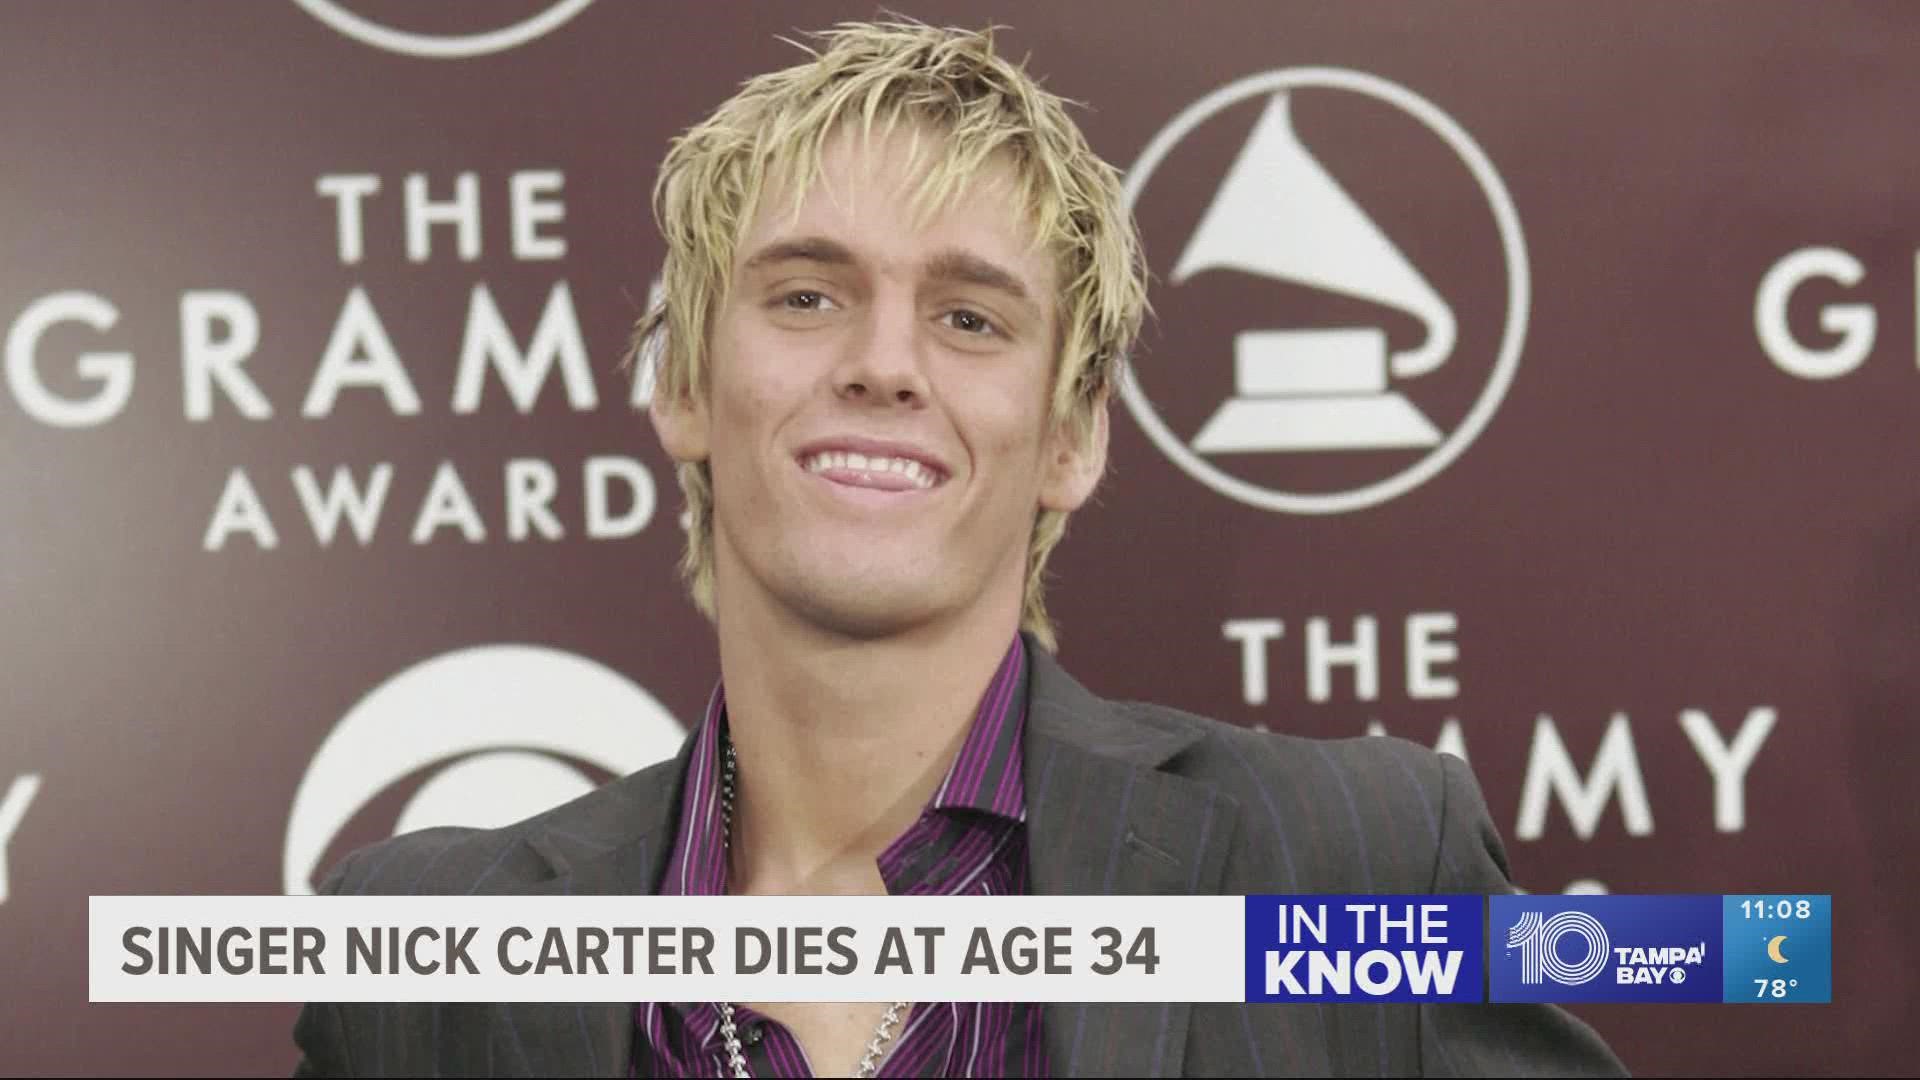 The 34-year-old singer was reportedly found dead in his California home on Saturday.